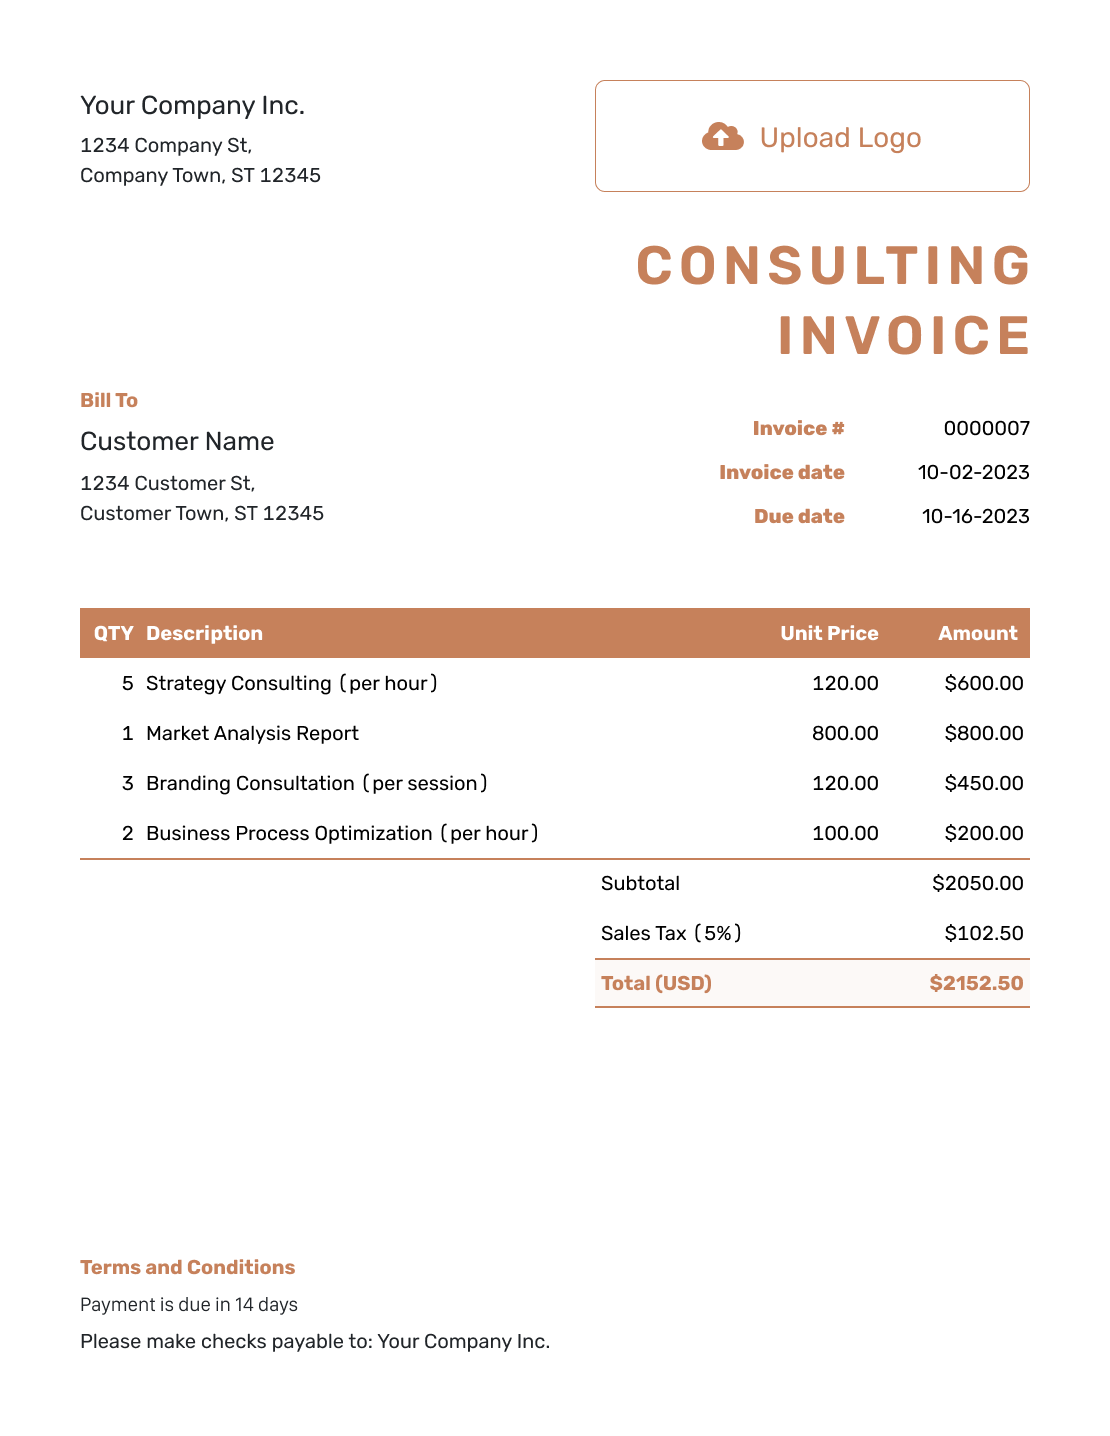 Standard Consulting Invoice Template